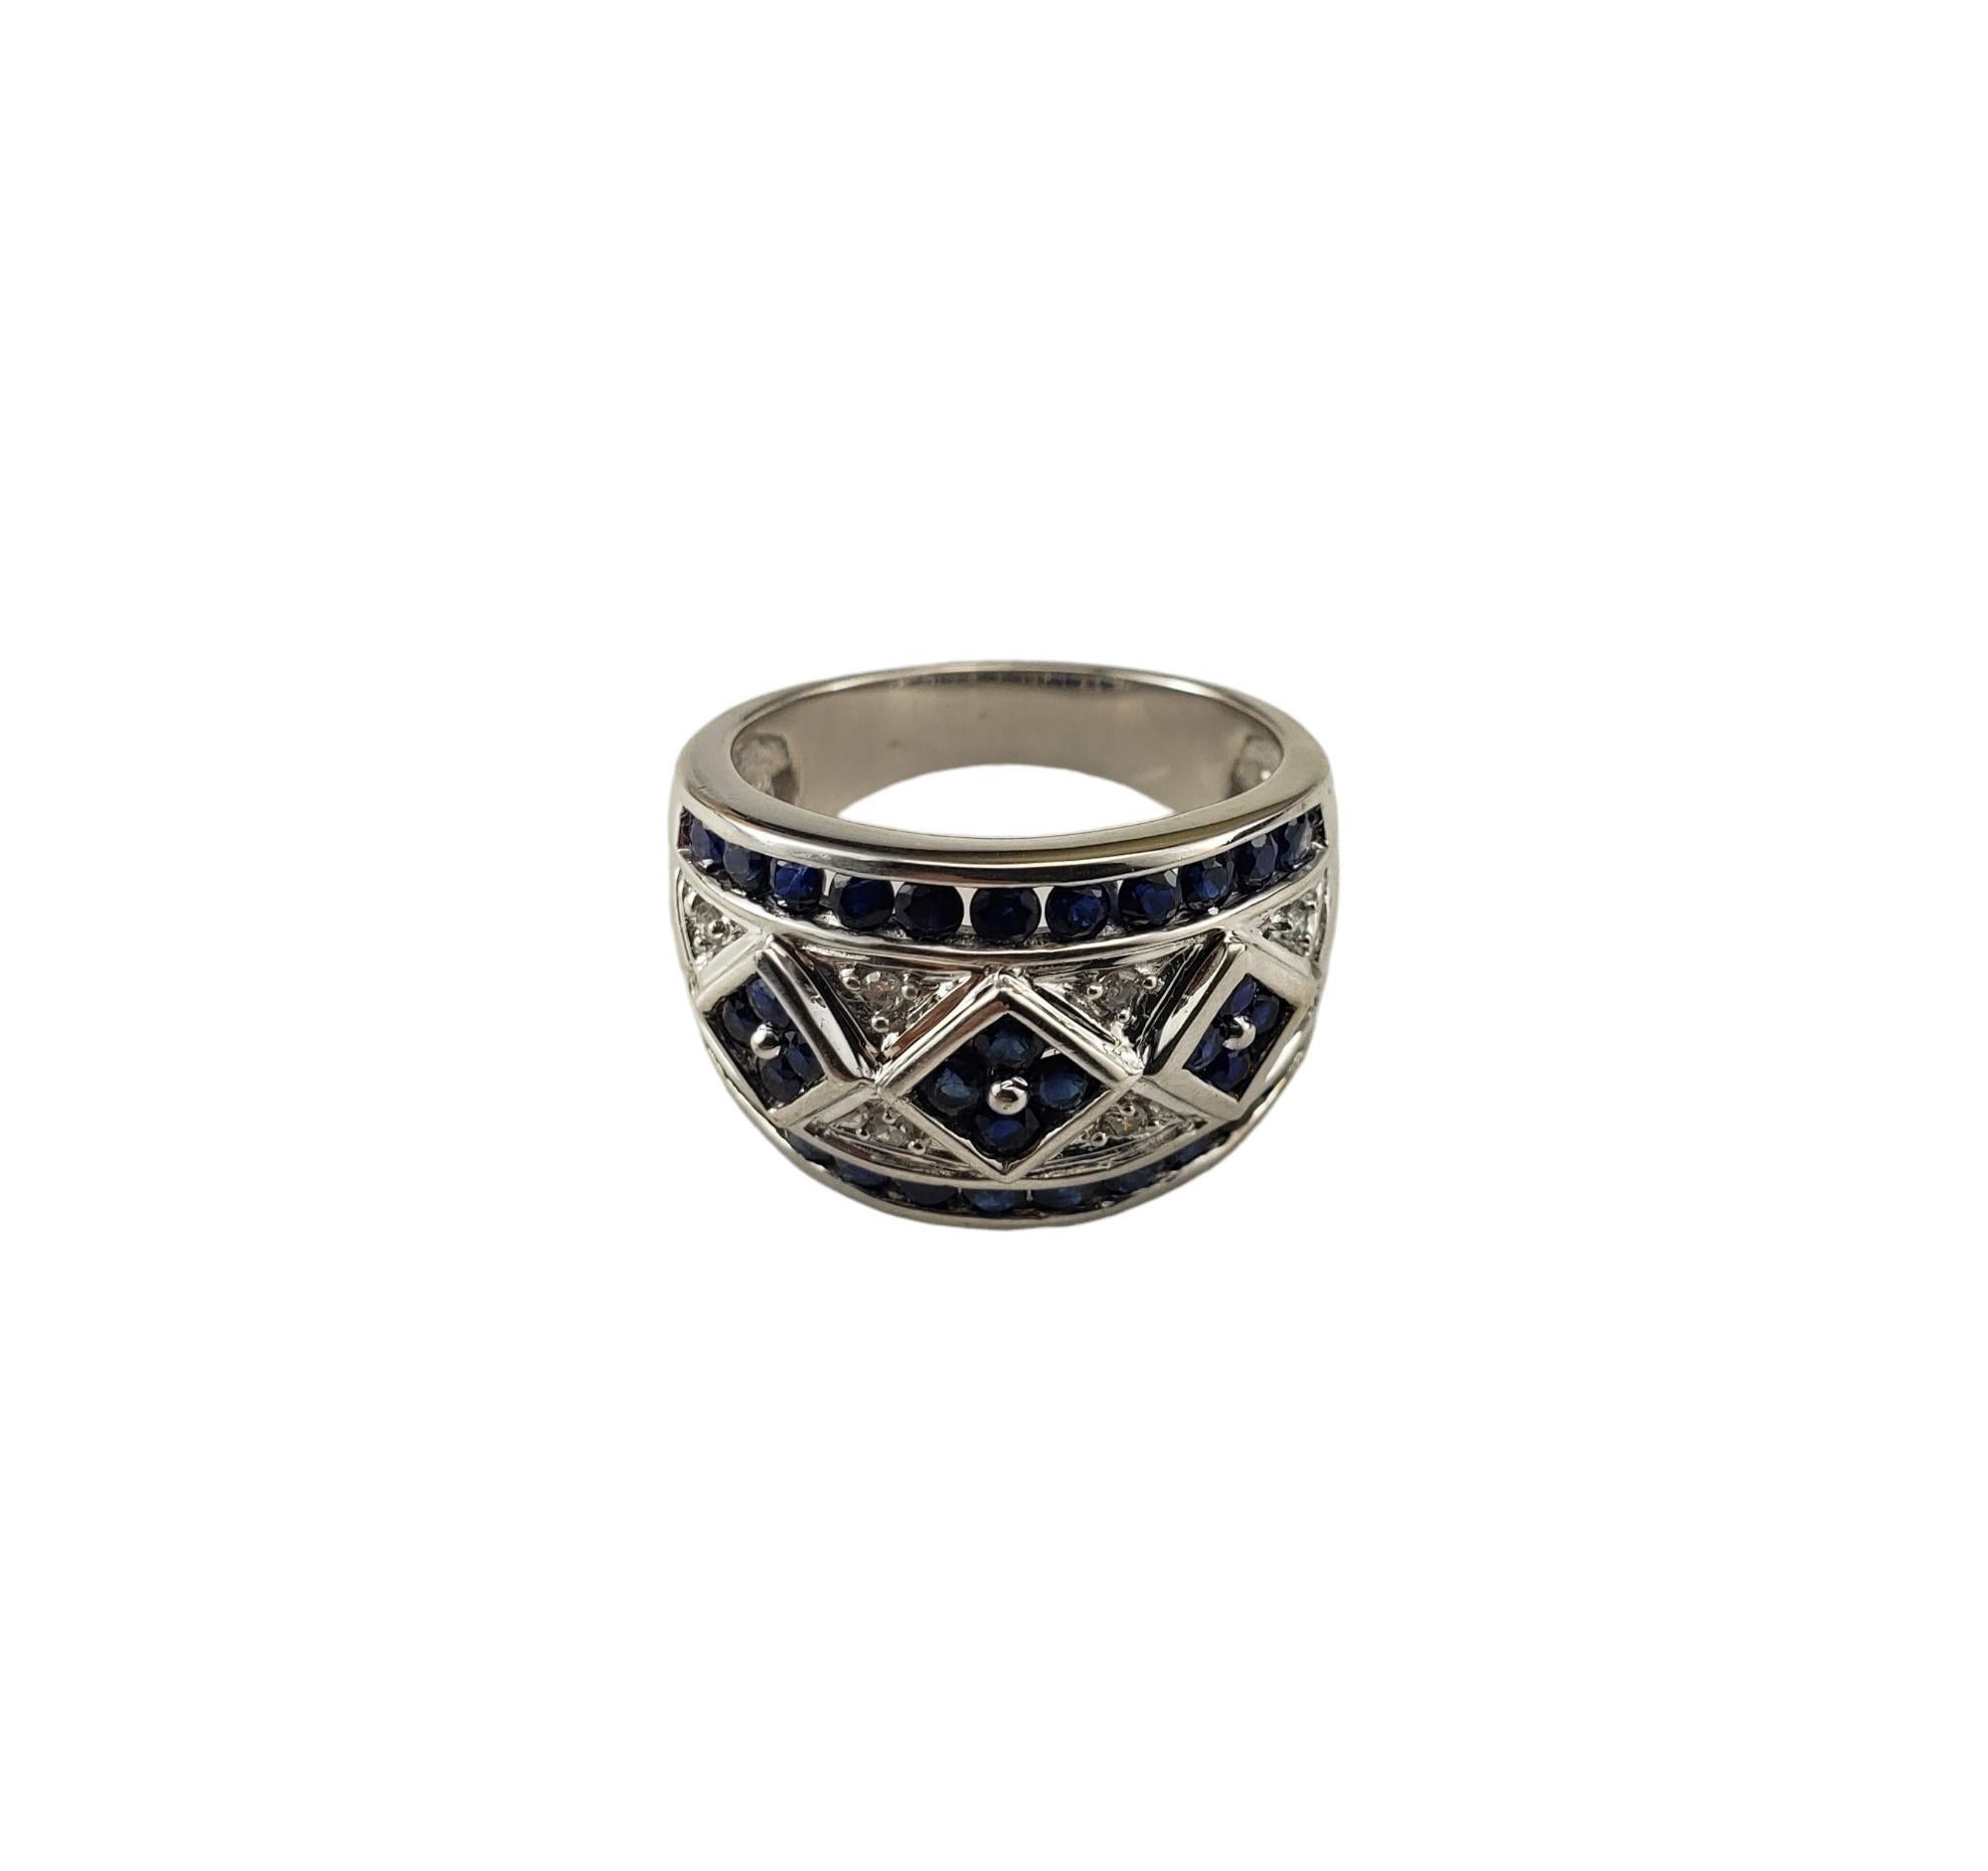 10K White Gold Sapphire and Diamond Band Ring Size 7

This elegant band features 34 round sapphires and eight round single cut diamonds set in classic 10K white gold.  

Width:  13.5 mm.  Shank: 4.5 mm.

Approximate total diamond weight: .08